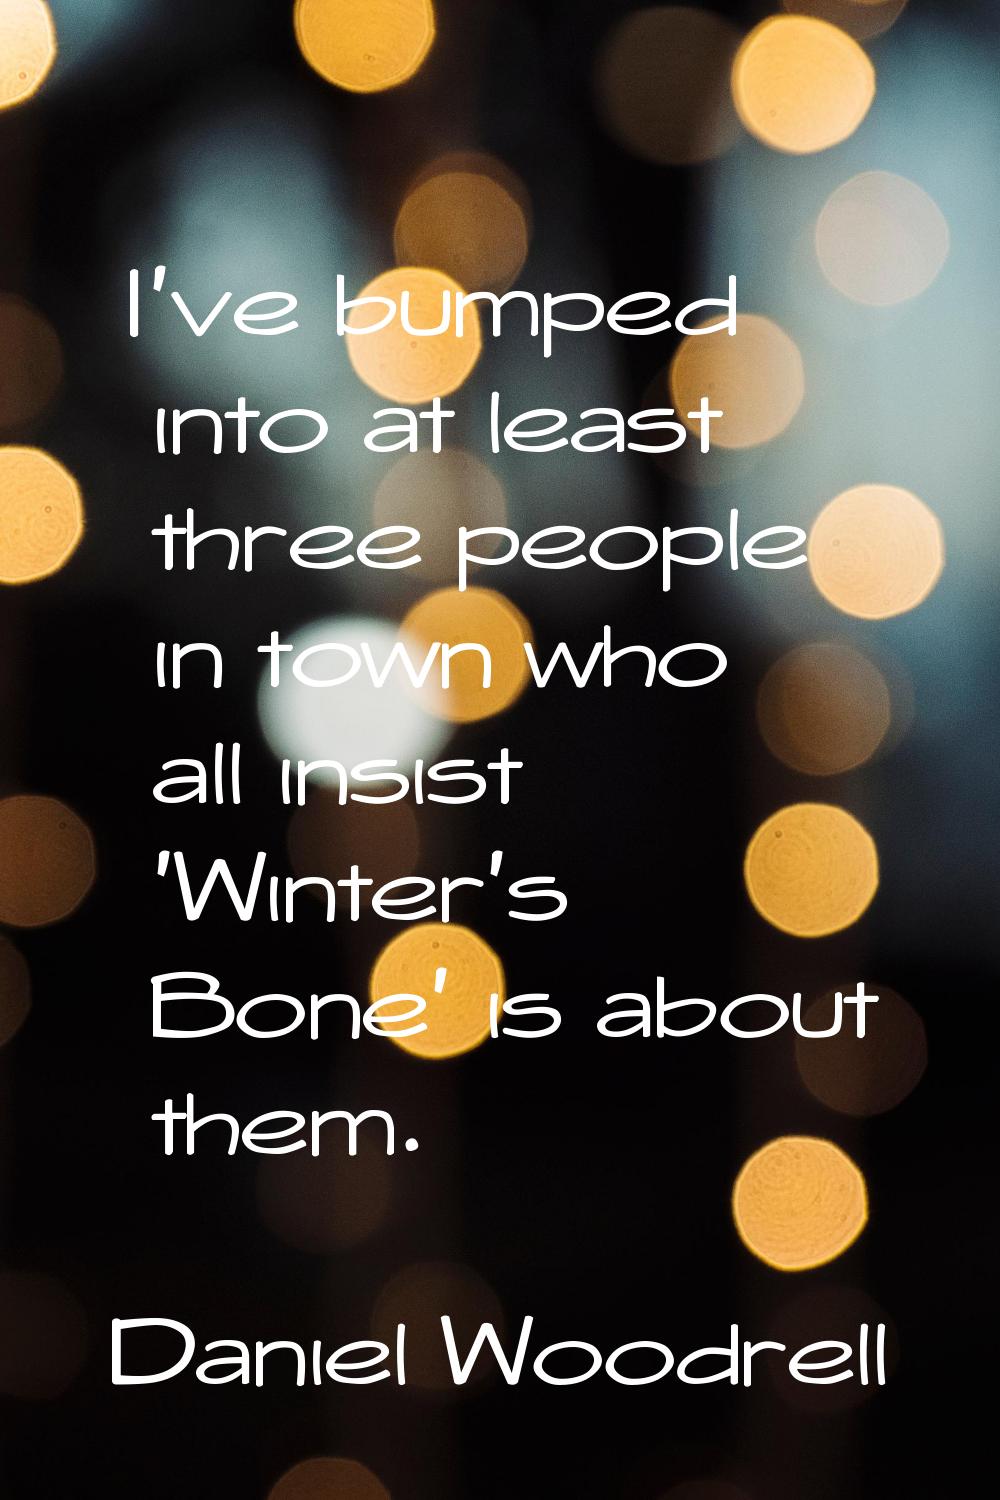 I've bumped into at least three people in town who all insist 'Winter's Bone' is about them.